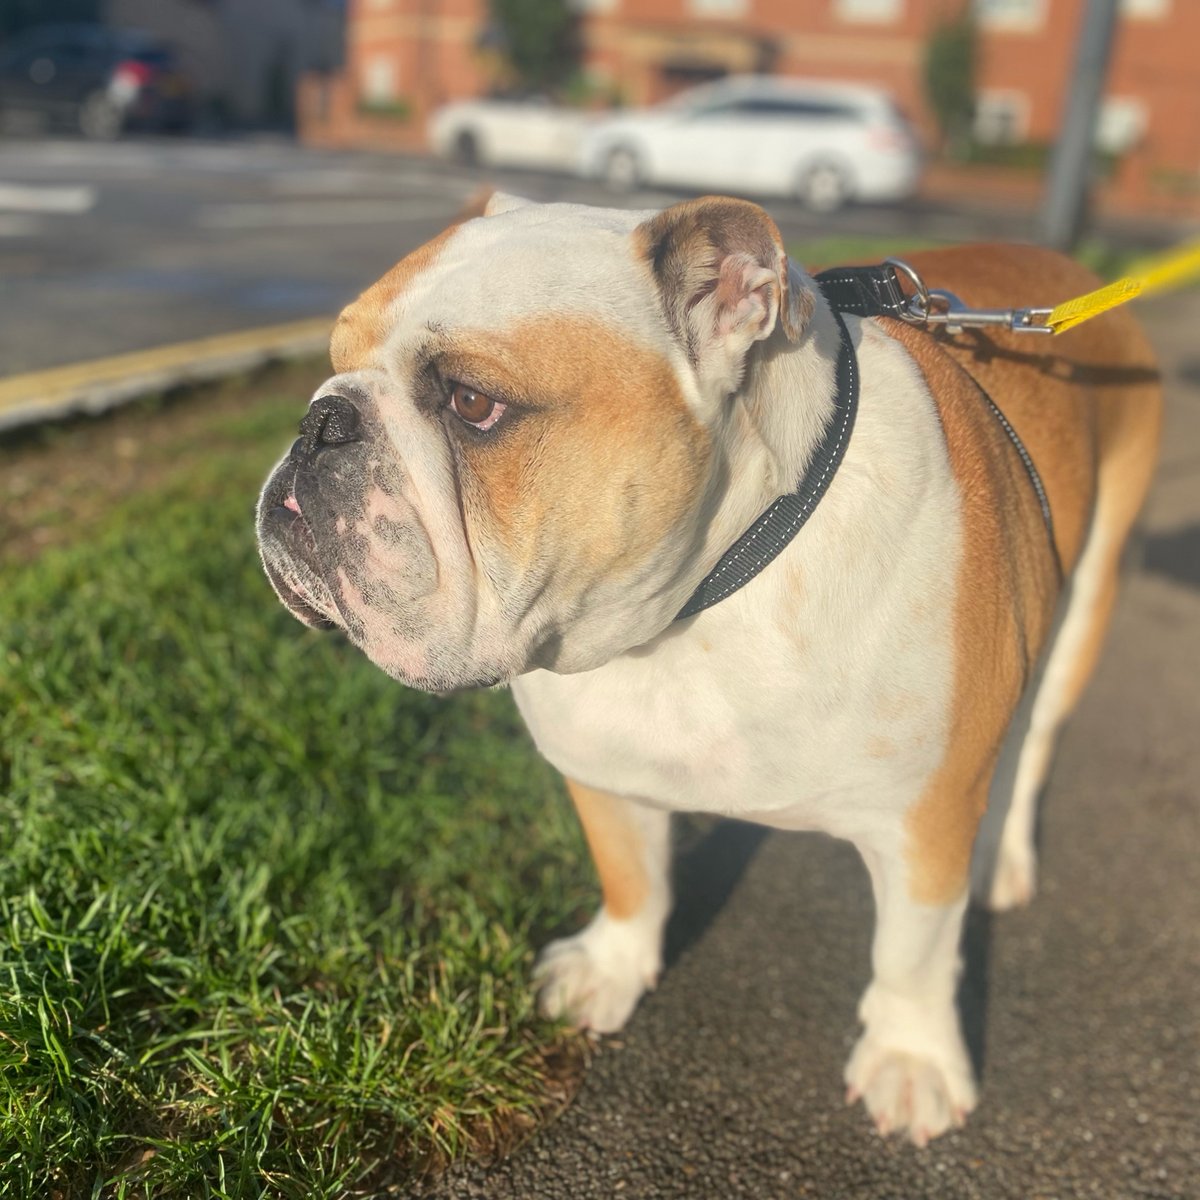 Happy #Saturday everyone! Looks like it’s going to be a nice fine day ☀️ have a great #Weekend 📷#BarneyTheBulldog #DogsOfTwitter #DogsOfX #DogsOfIG #DogsOfFacebook #Bulldog #EnglishBulldog
📷 @barney_bulldog